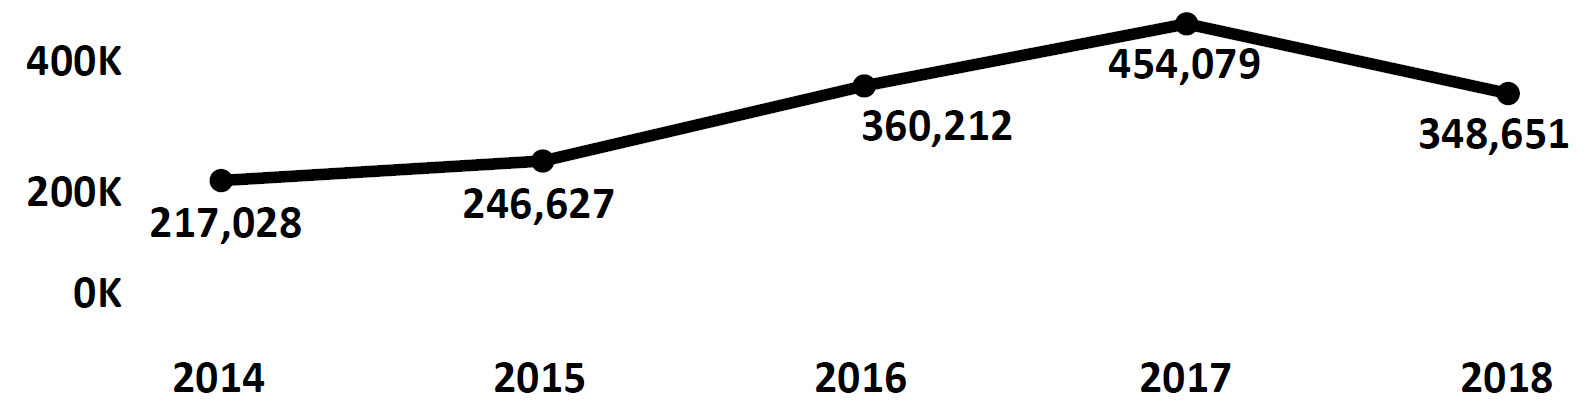 Graph of Do Not Call complaints recorded in New York from fiscal year 2014 to fiscal year 2018. In 2014 there were 217,028 complaints filed, which increased each year peaking at 454,079 in 2017. In 2018 there were 348,651 complaints filed, fewer than 2017.